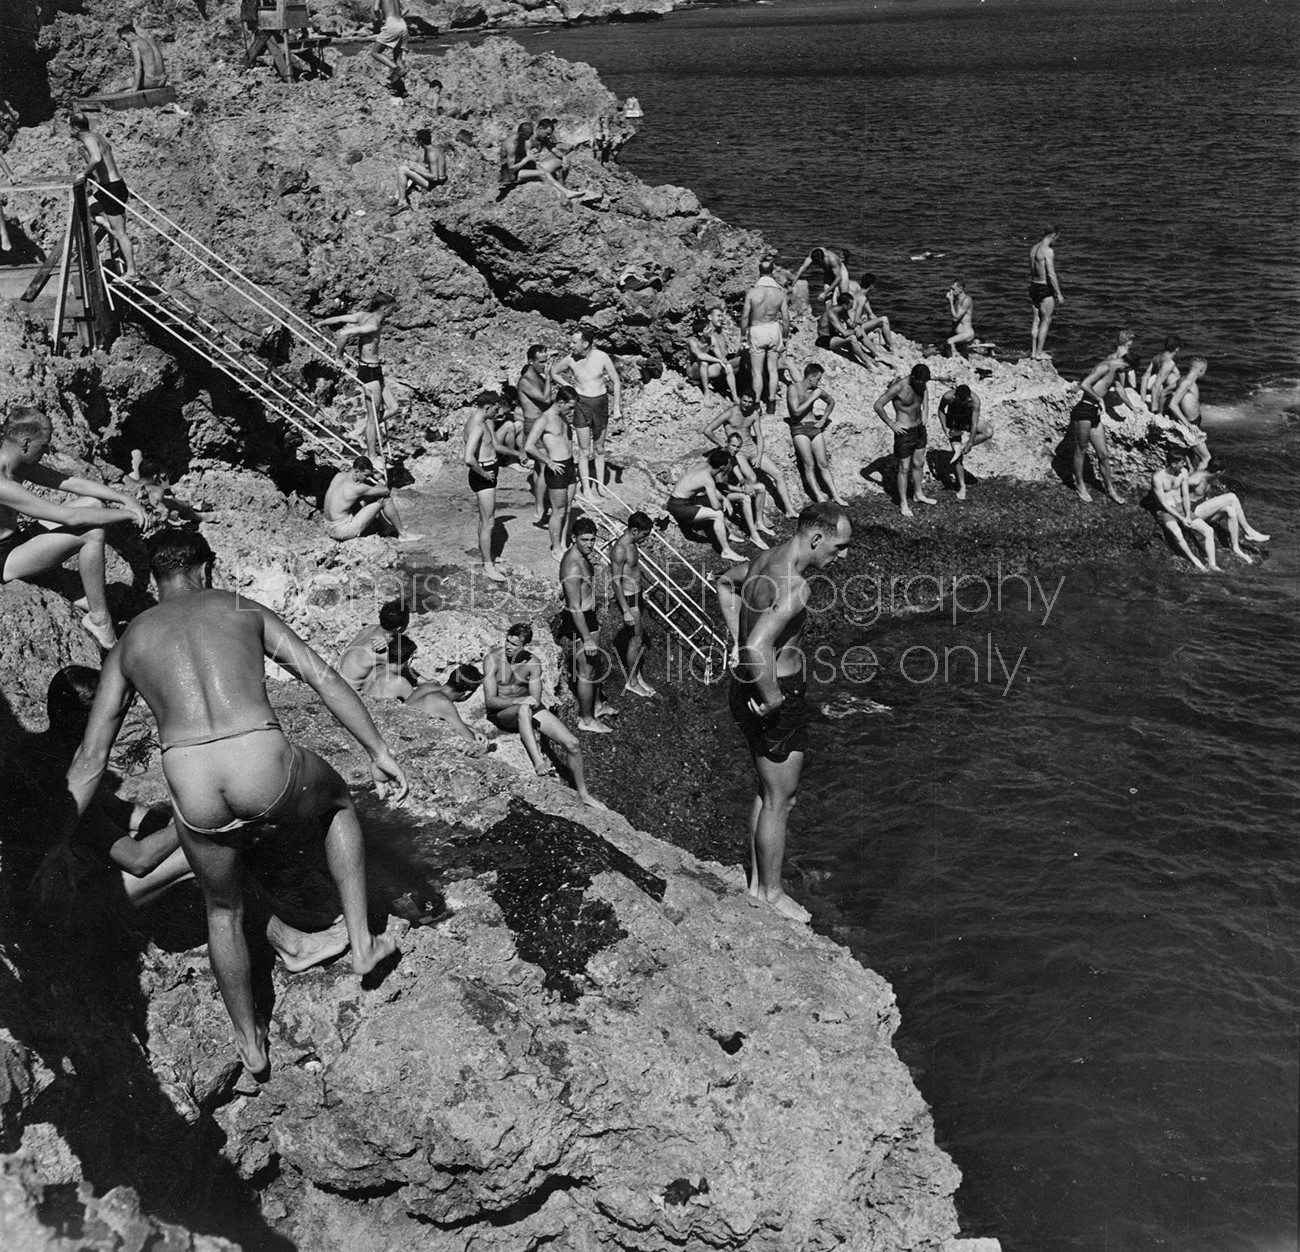 SWIMMING U.S. SOLDIERS WWII PACIFIC 